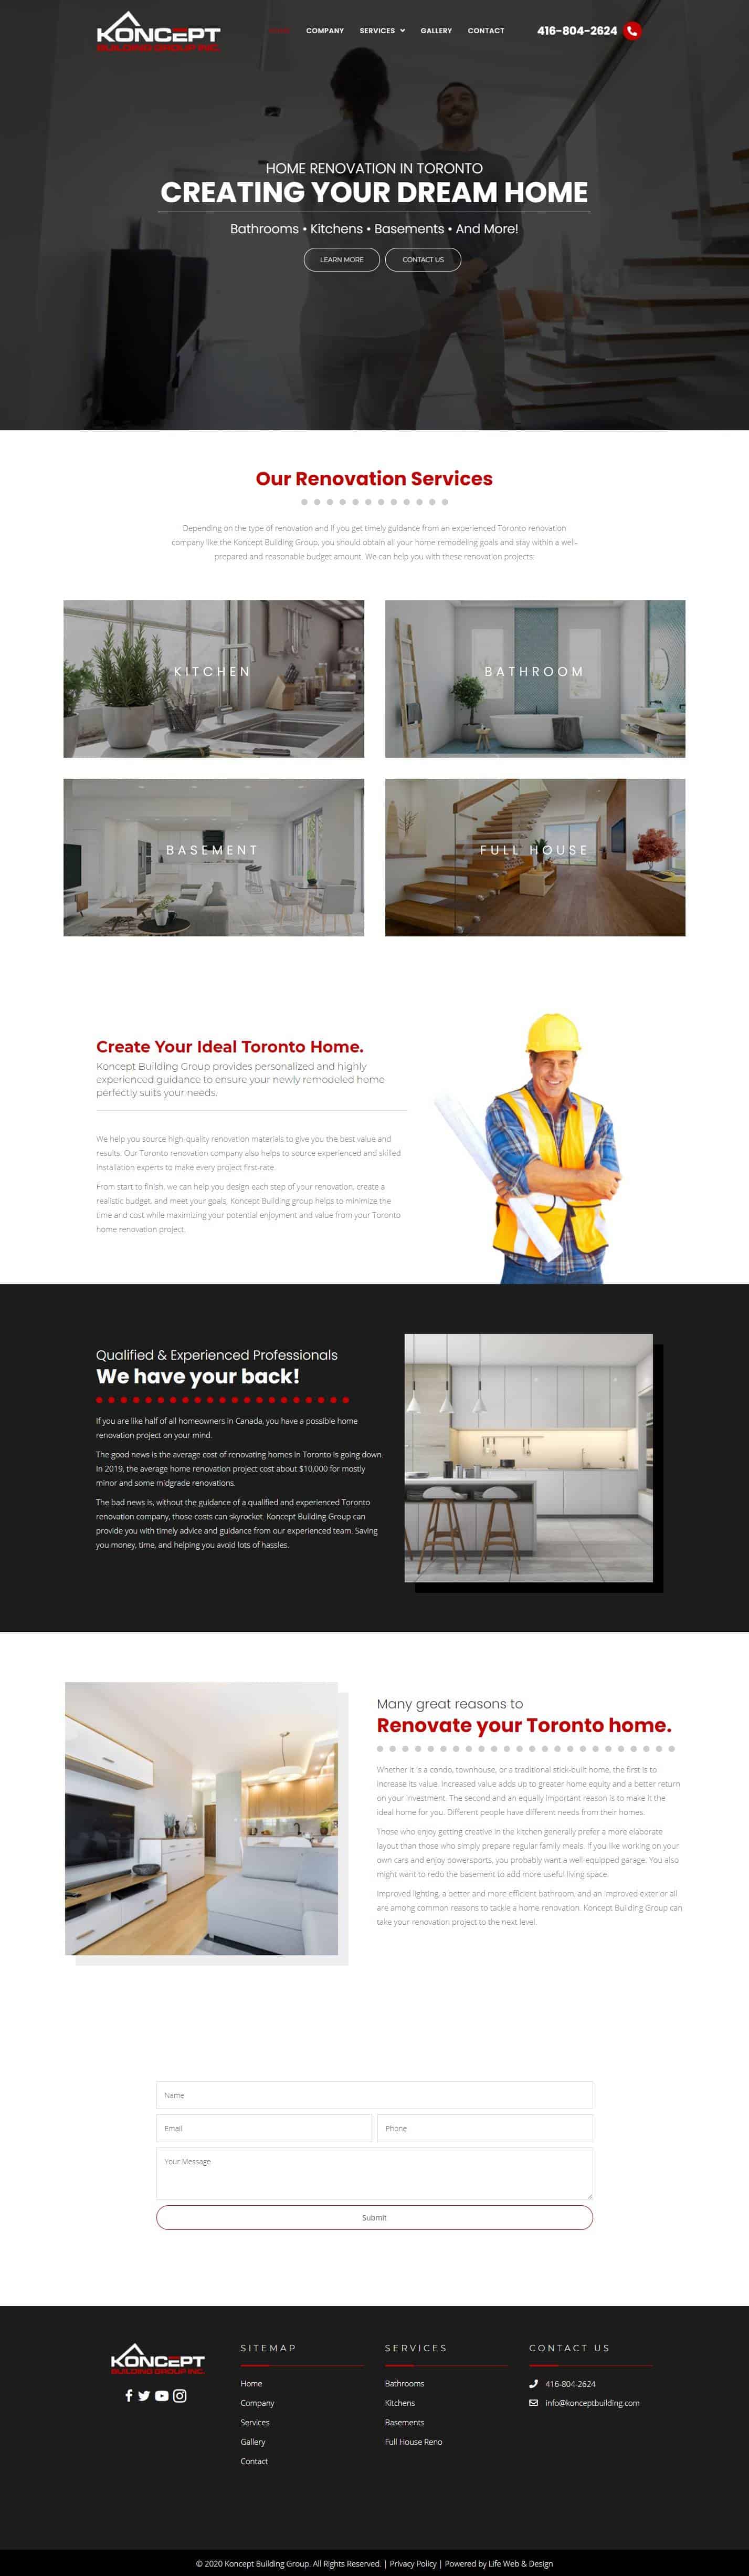 web design project for home renovation company in Toronto Ontario